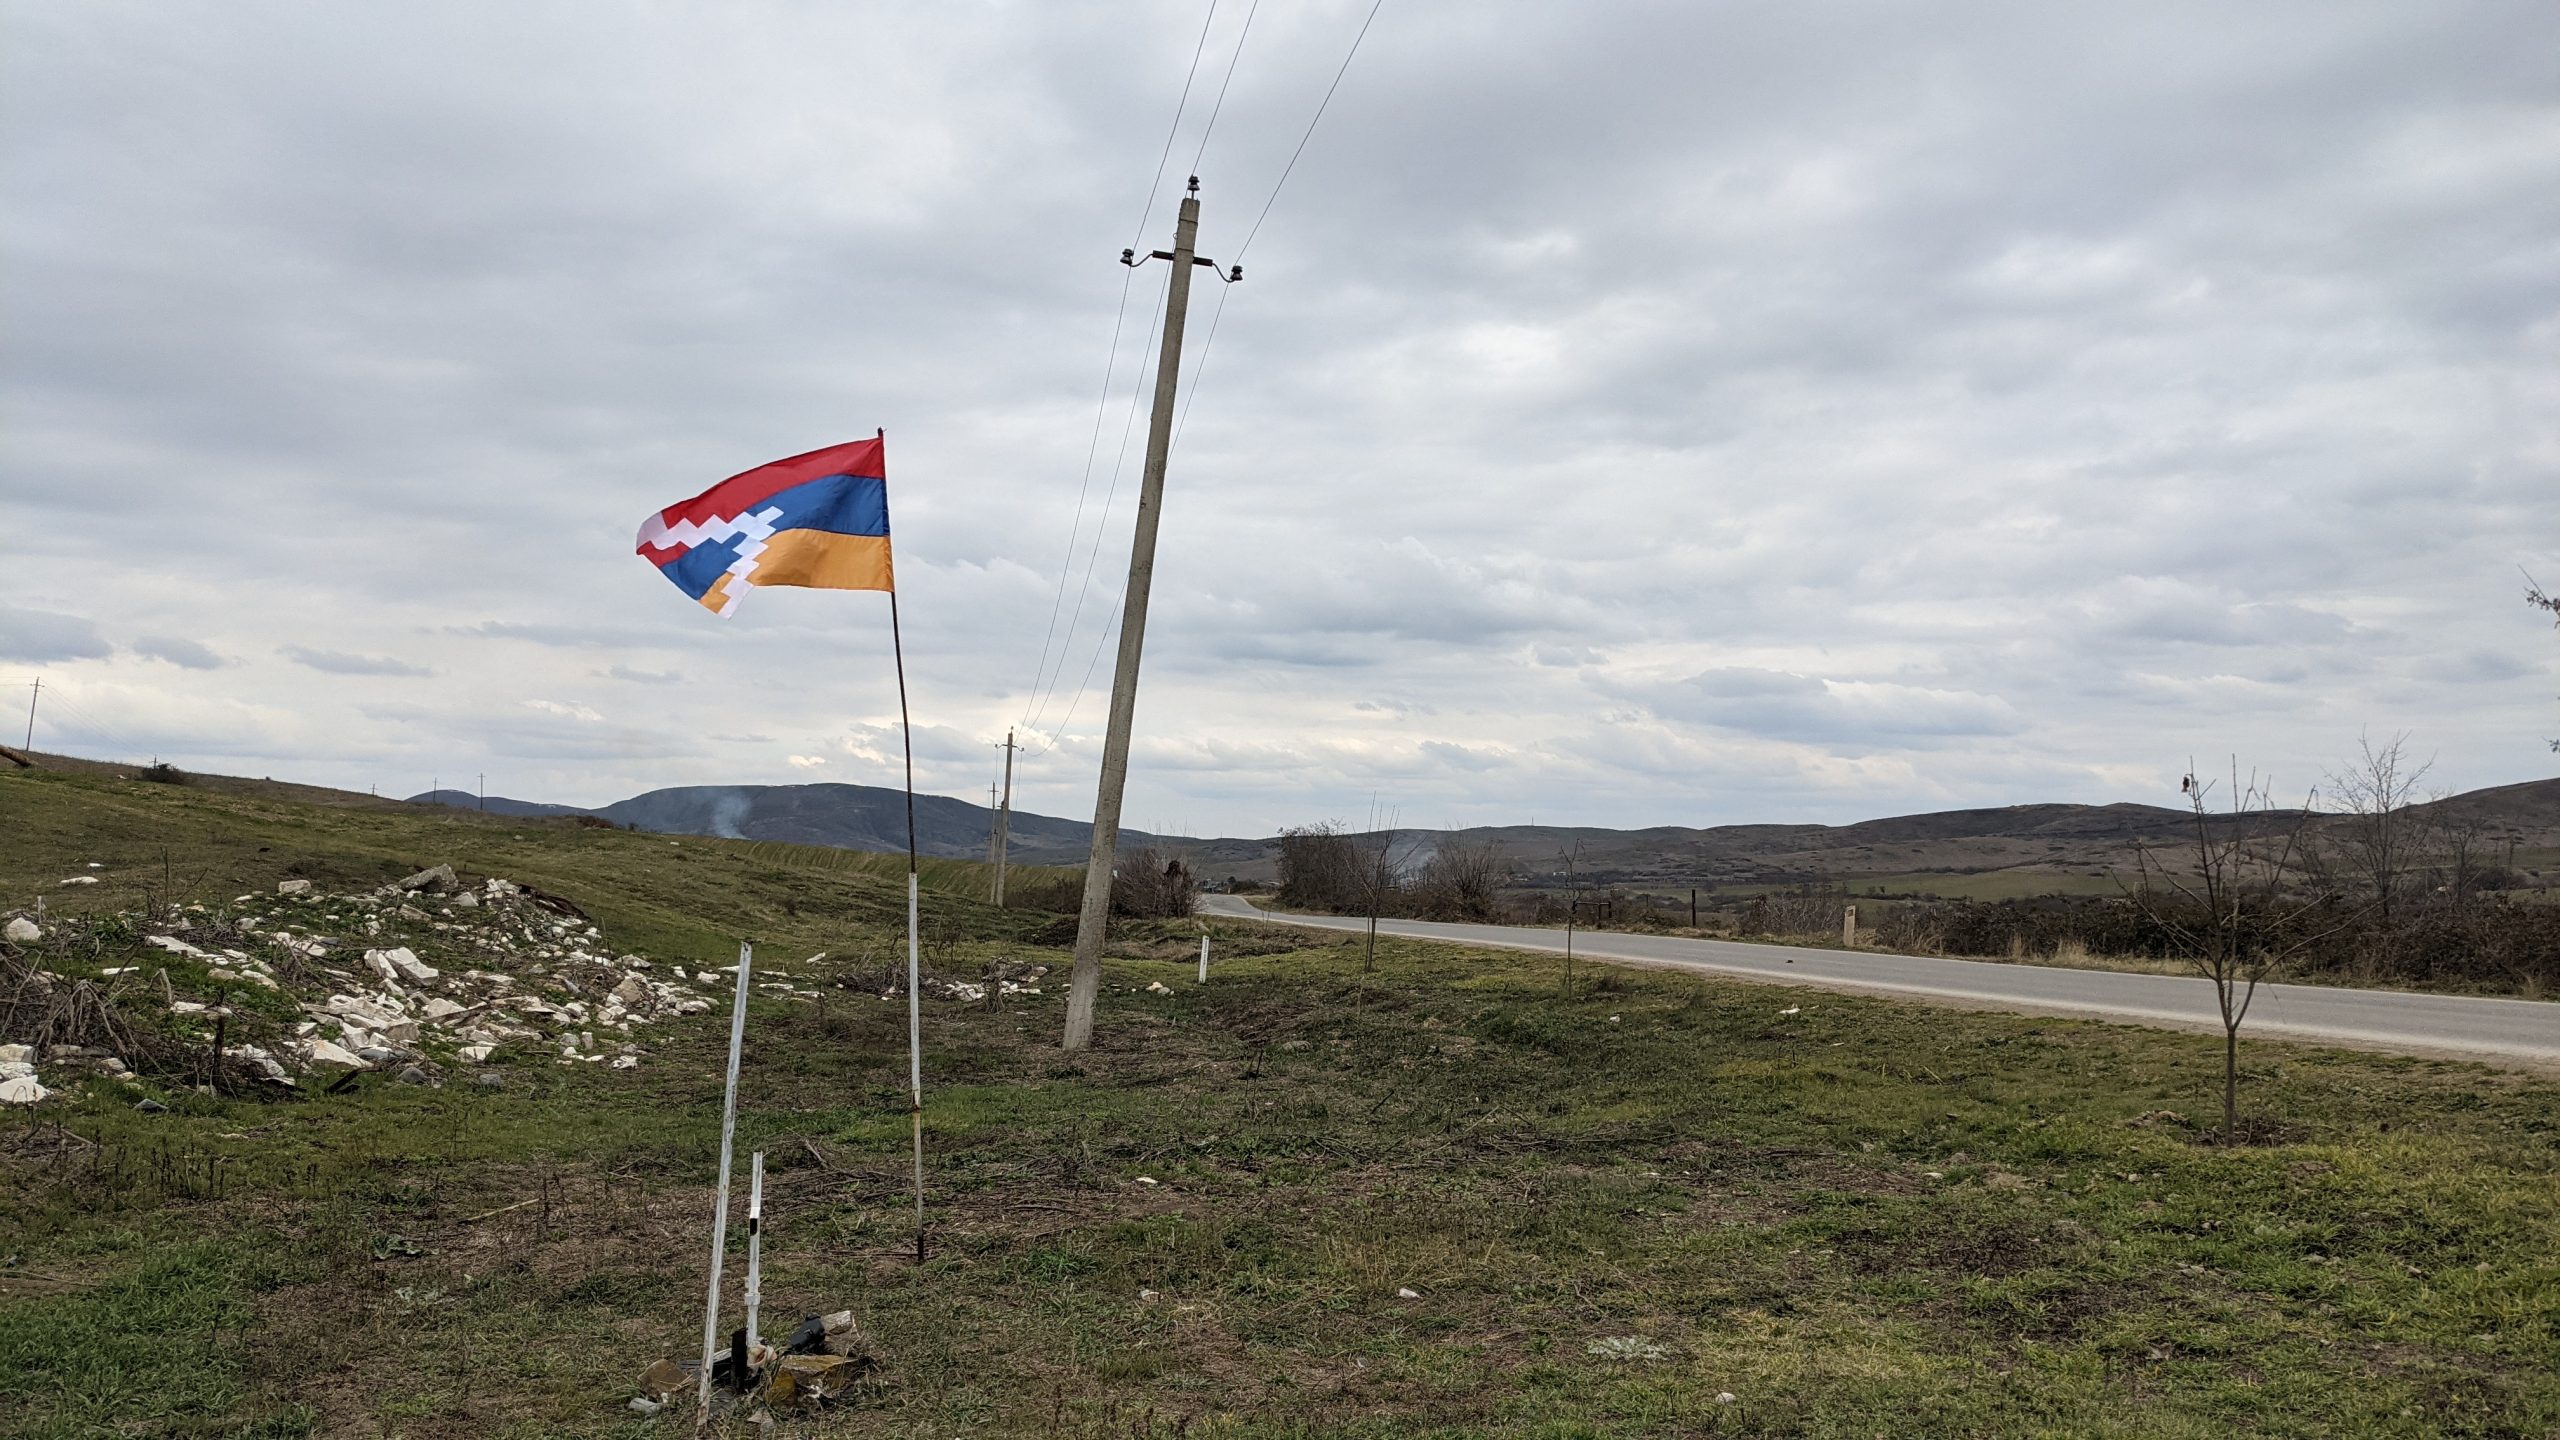 Karabakh president declares partial mobilization as two Armenian soldiers killed in major escalation